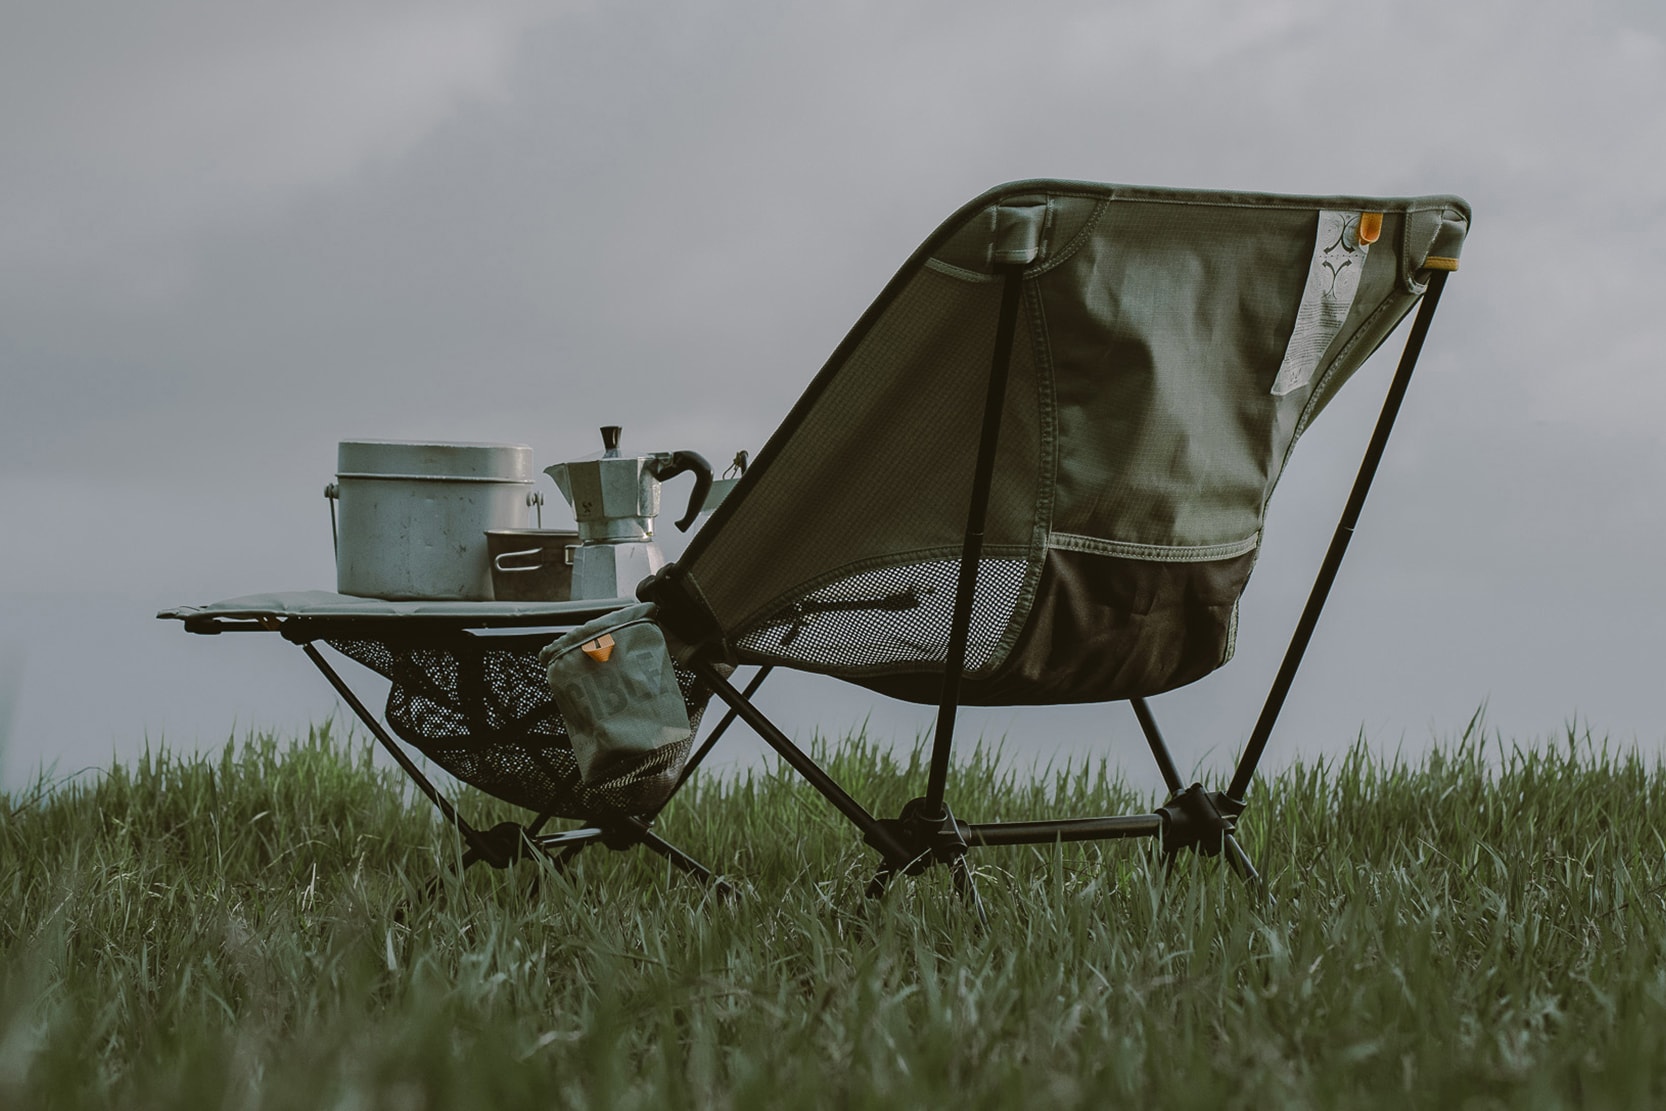 INVINCIBLE が Helinox とのチームアップでカプセルコレクションをリリース INVINCIBLE Helinox 2022 capsule collection outdoors camping hiking collaborations chairs cots 